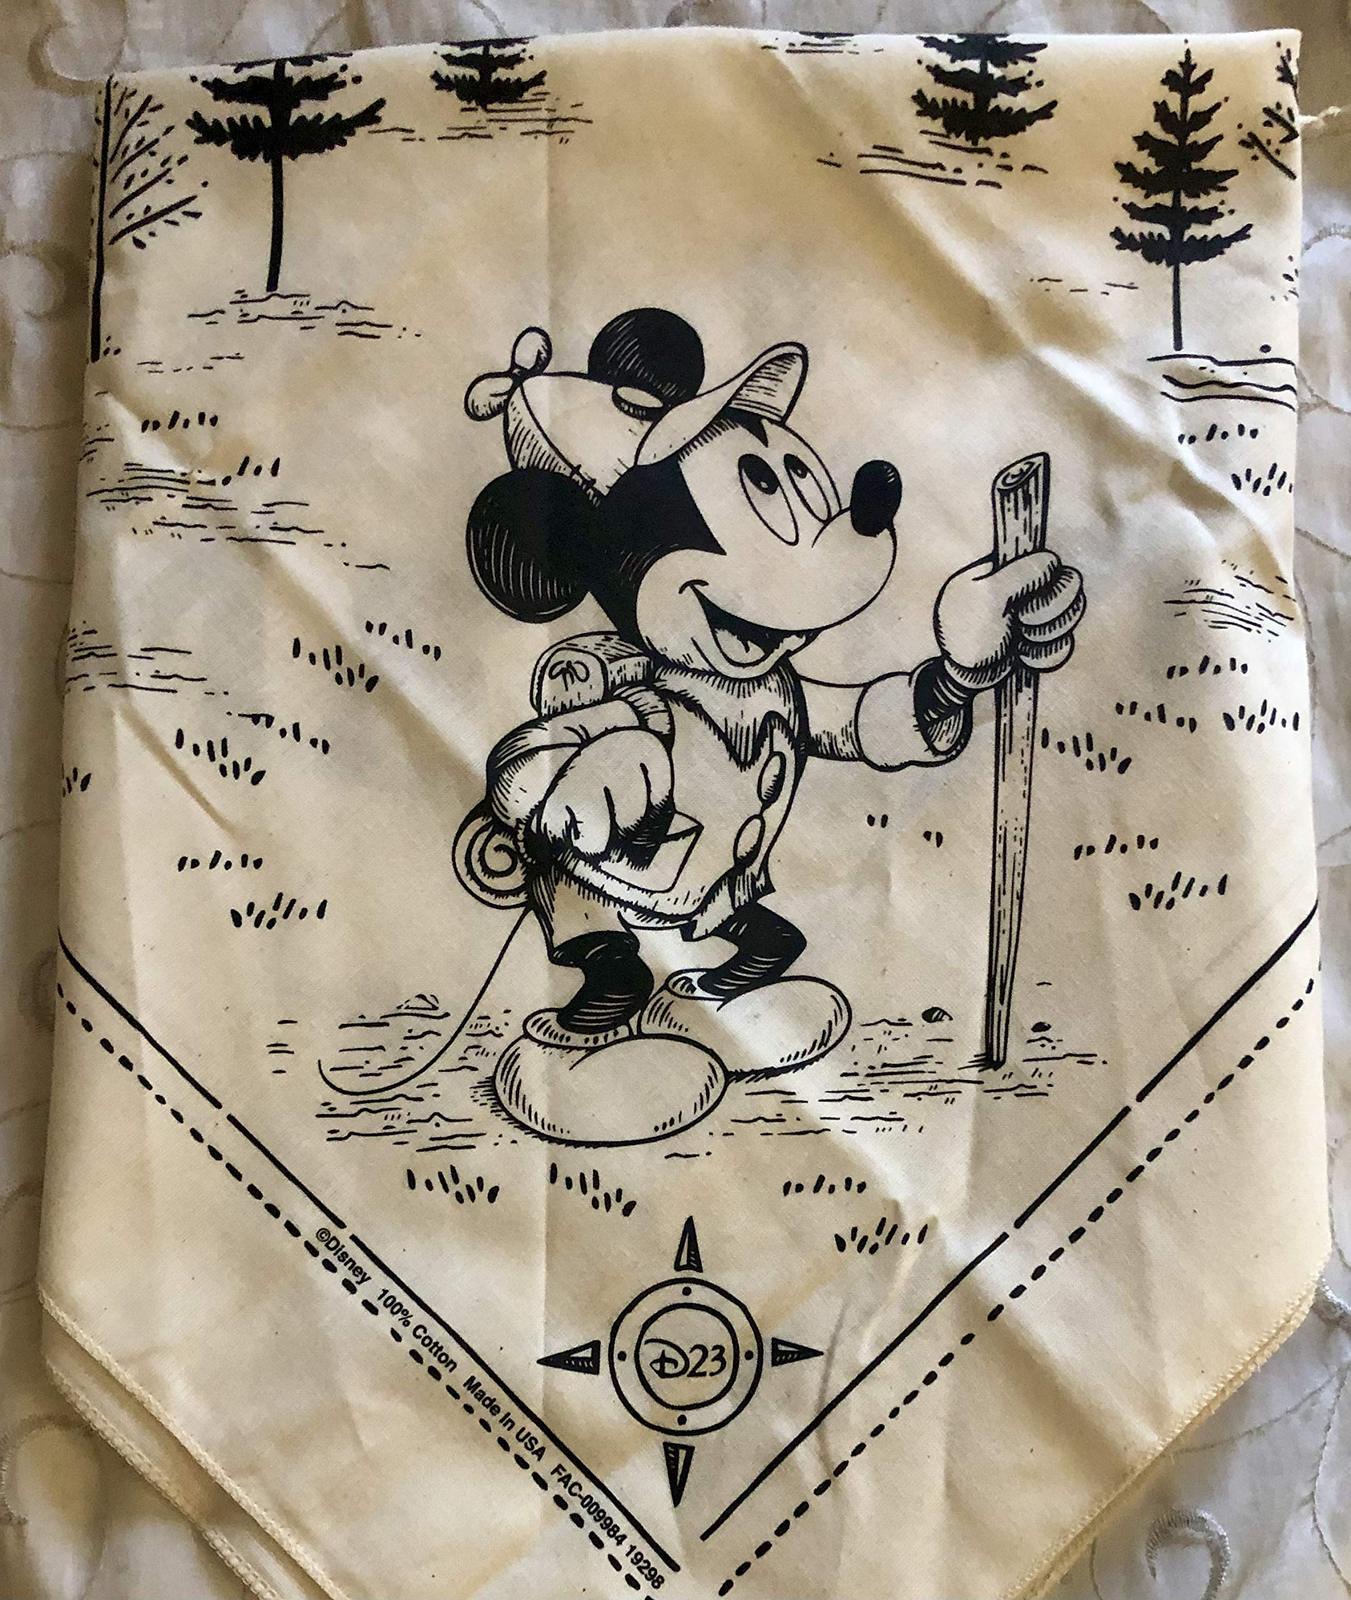 Primary image for D23 2020 Disney Mickey Mouse Fantastic Worlds Adventure Bandana Scarf